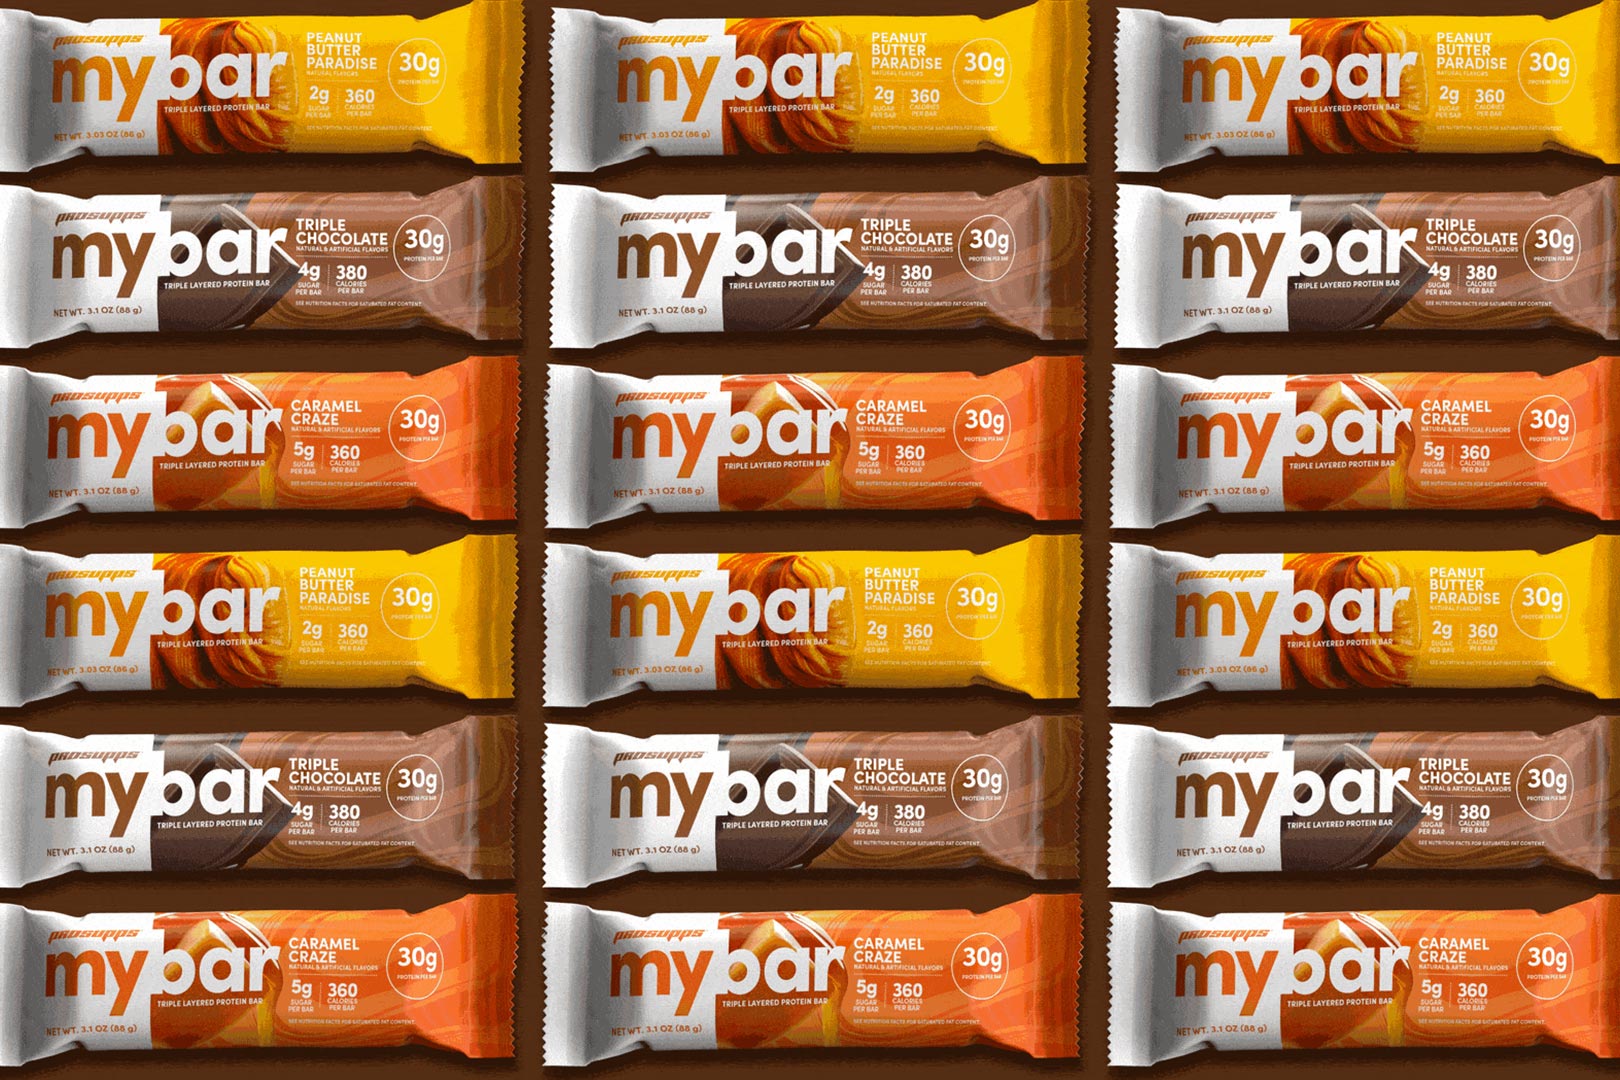 Prosupps Confirms Protein For Its 2023 Mybar